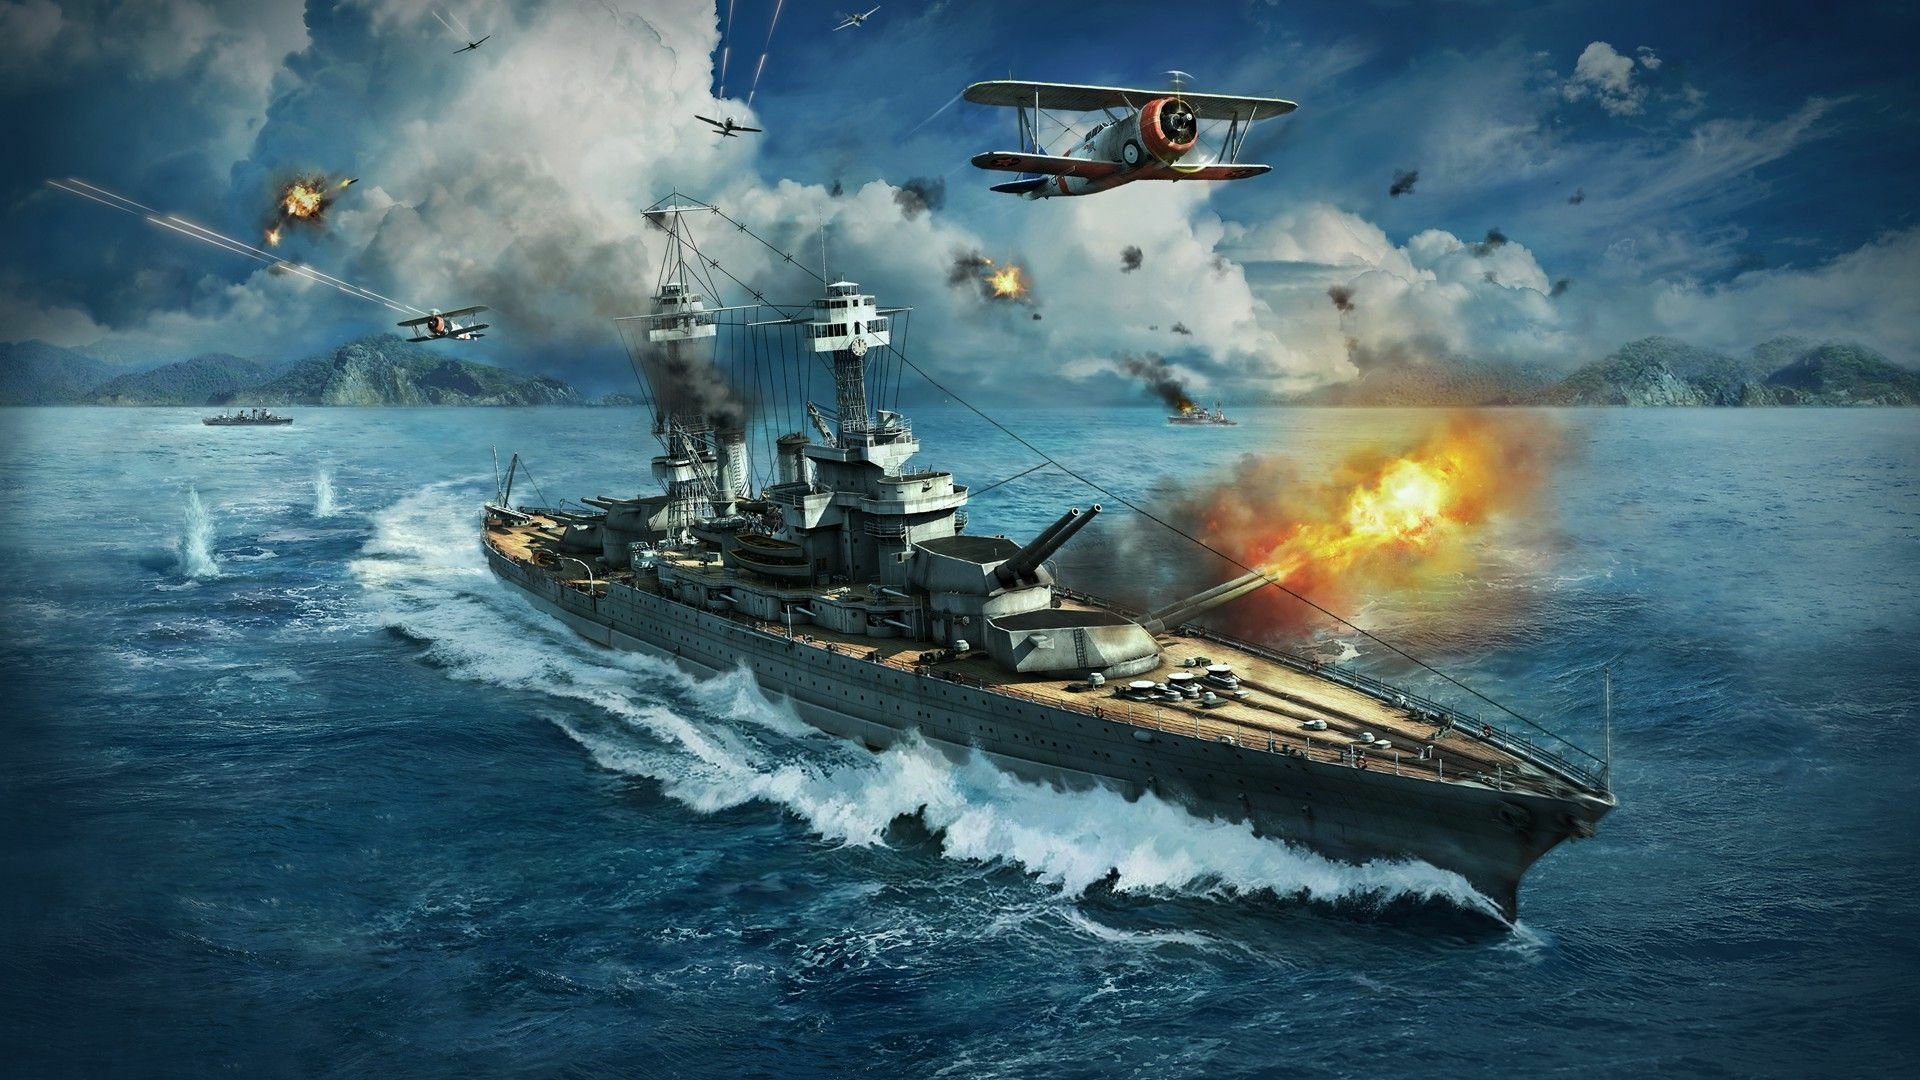 cant download world of warships on amazon hd 8